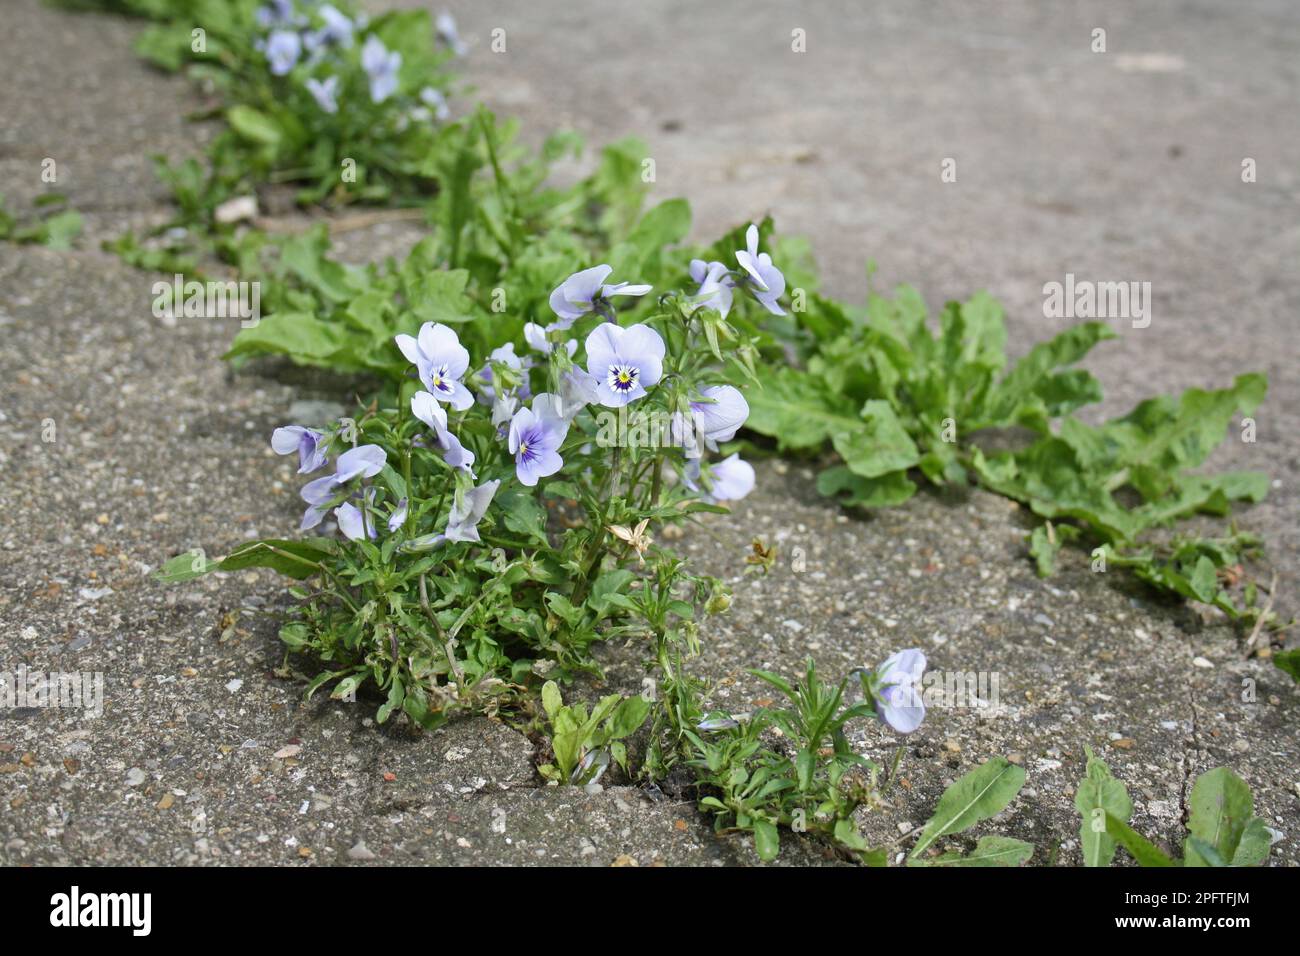 Garden pansy (Viola sp.) flowers, self-sown and growing in the cracks of the garden terrace, Suffolk, England, United Kingdom Stock Photo